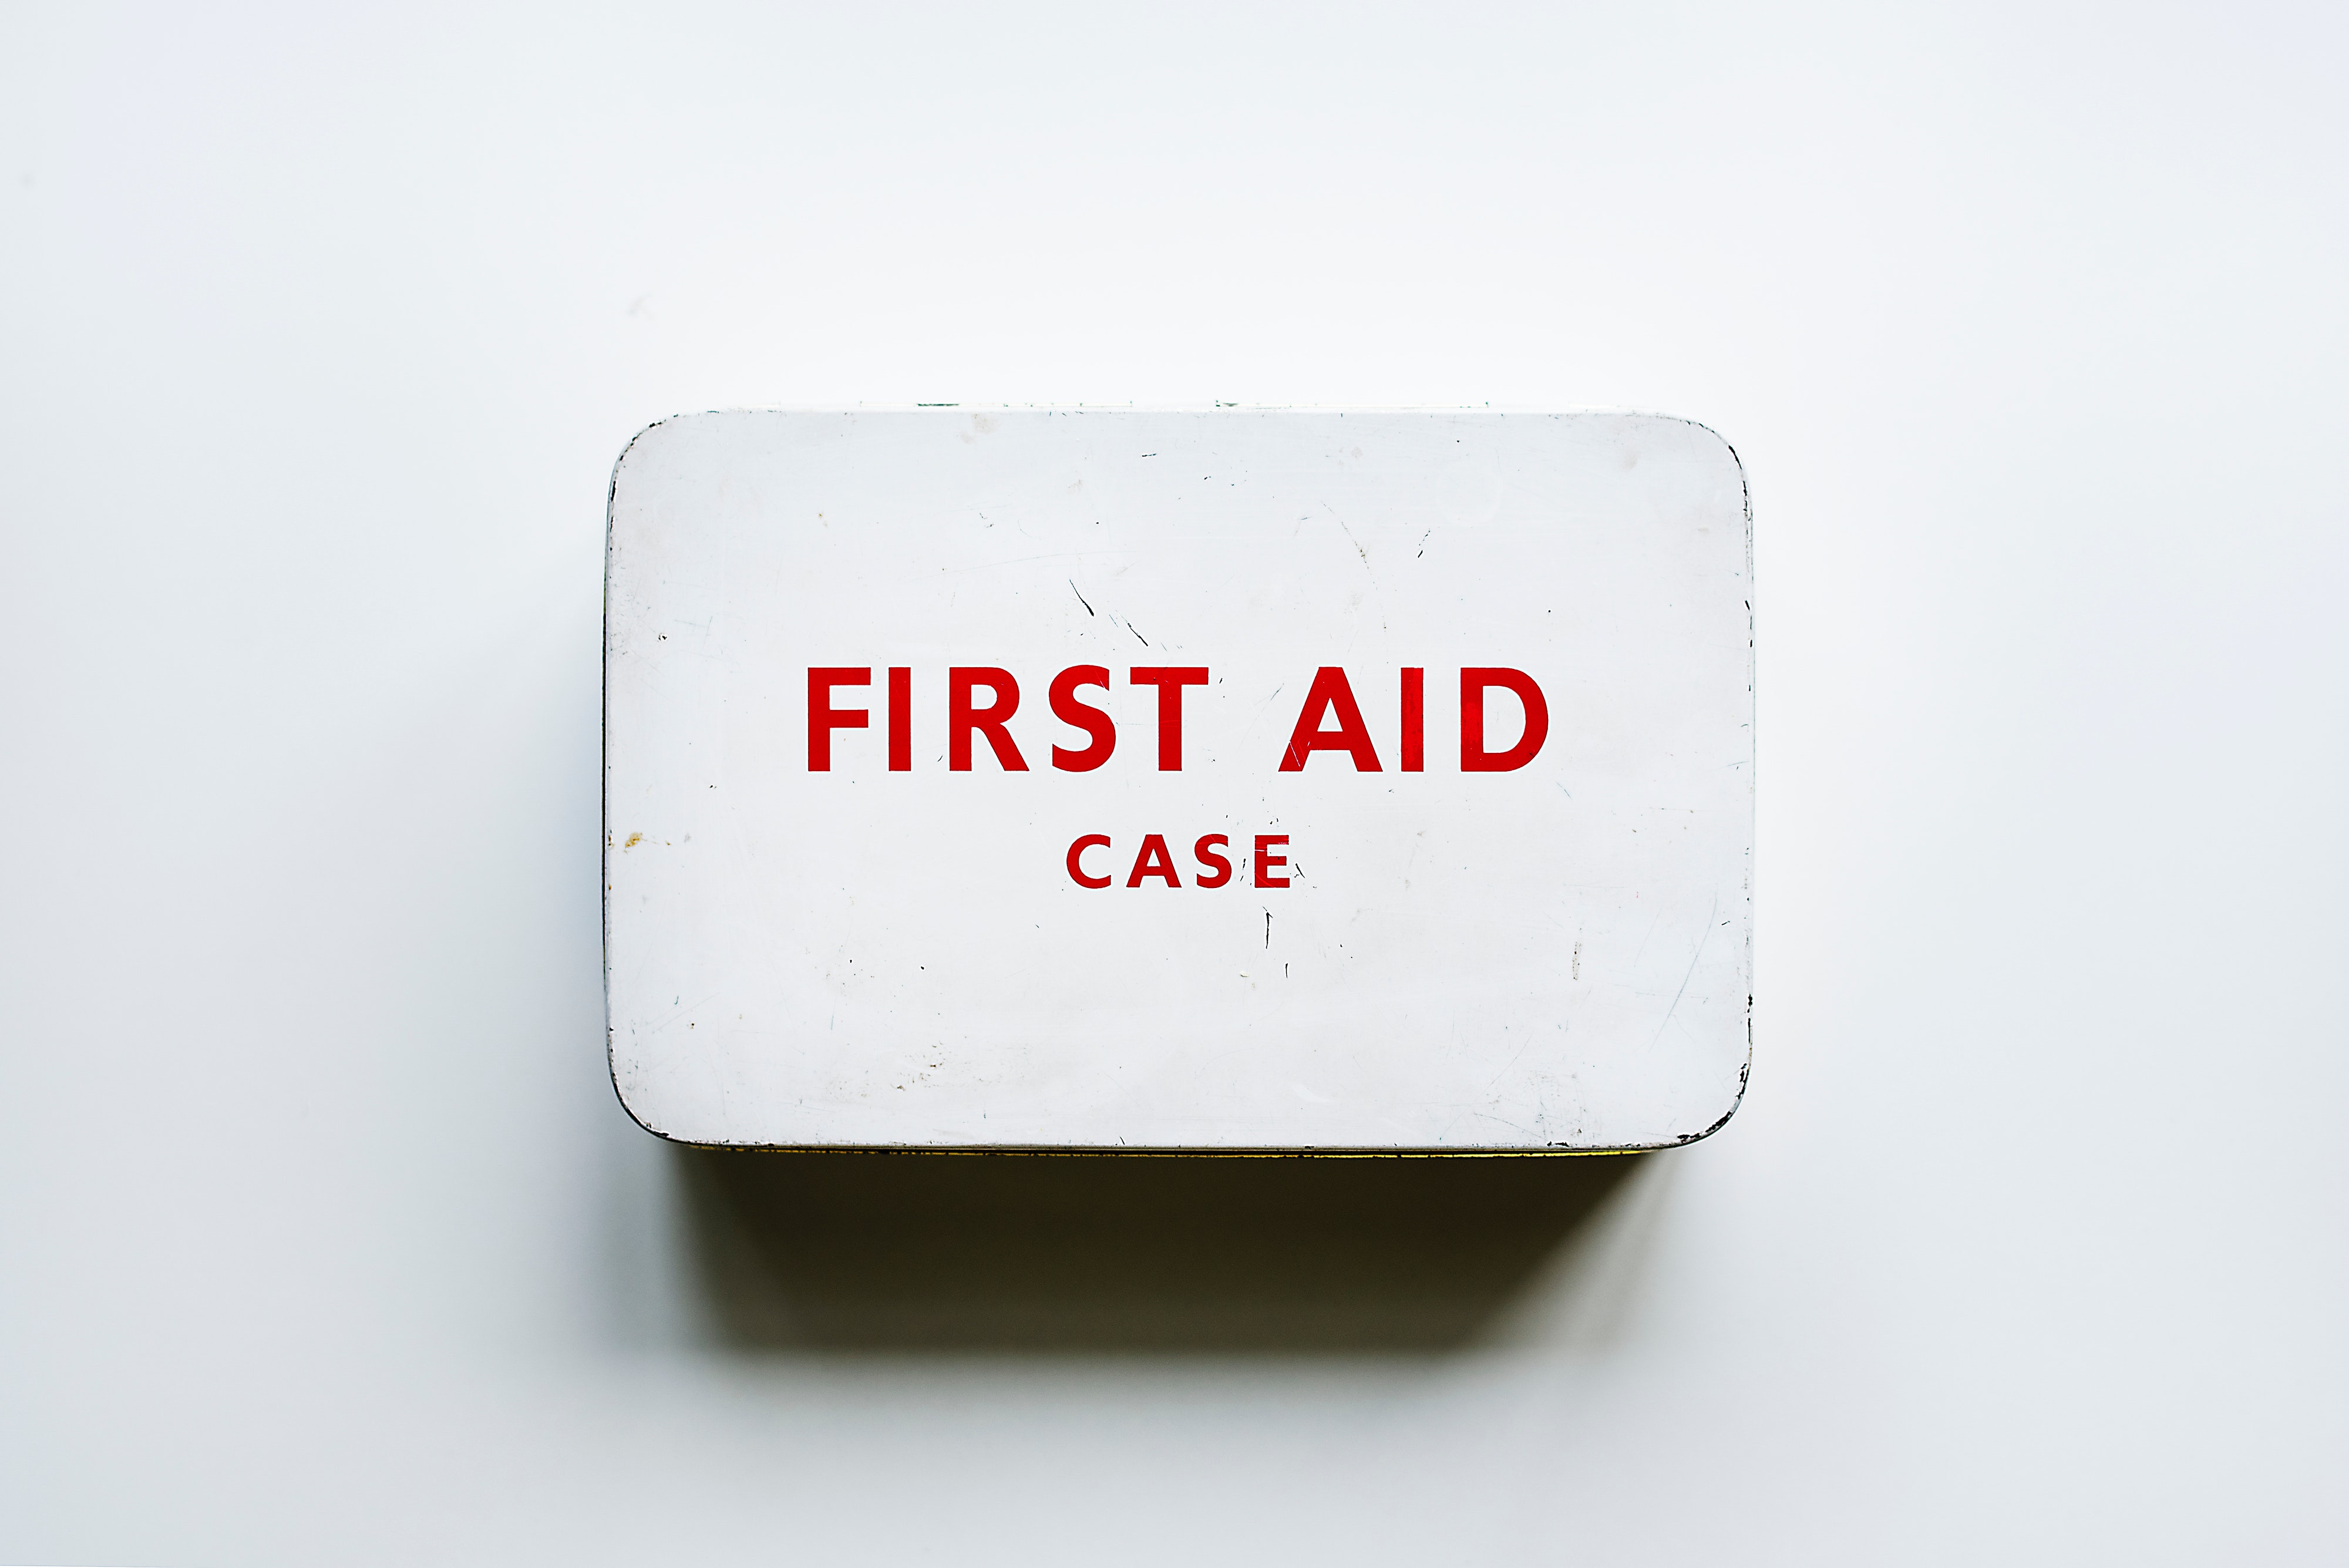 image of first aid box